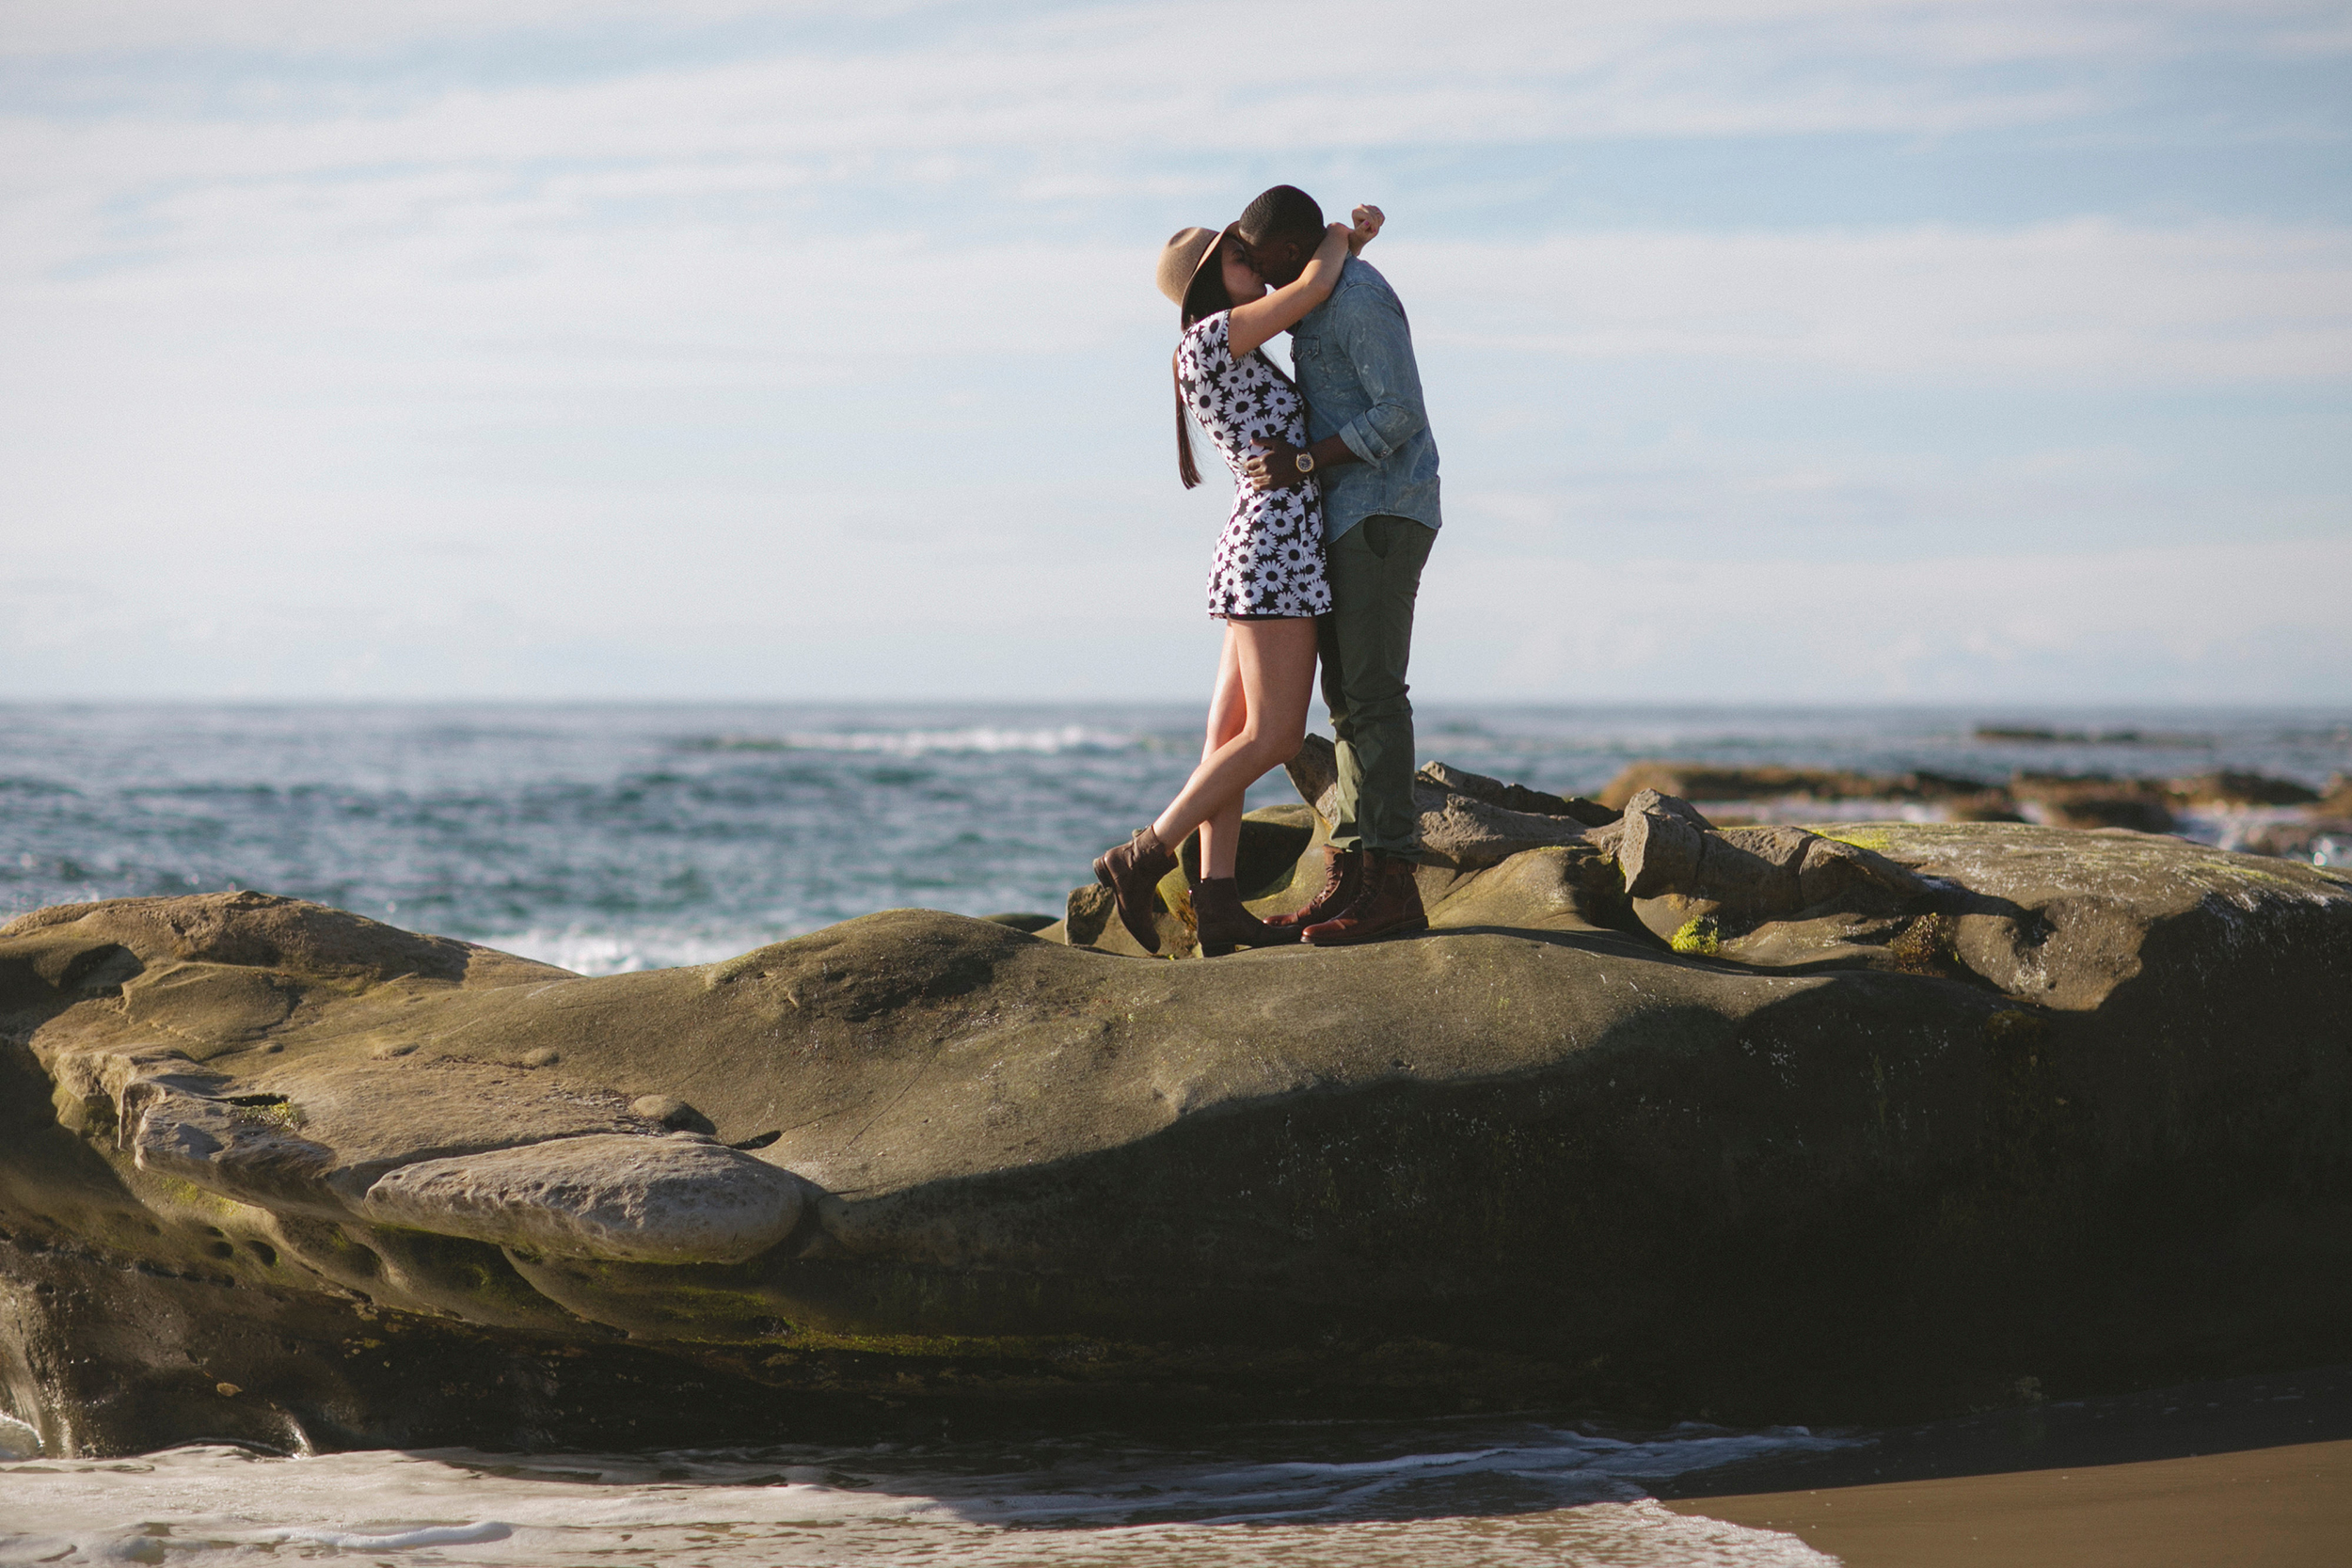 Colby-and-Jess-Adventure-Engagement-Photography-Torrey-Pines-La-Jolla-California60.jpg